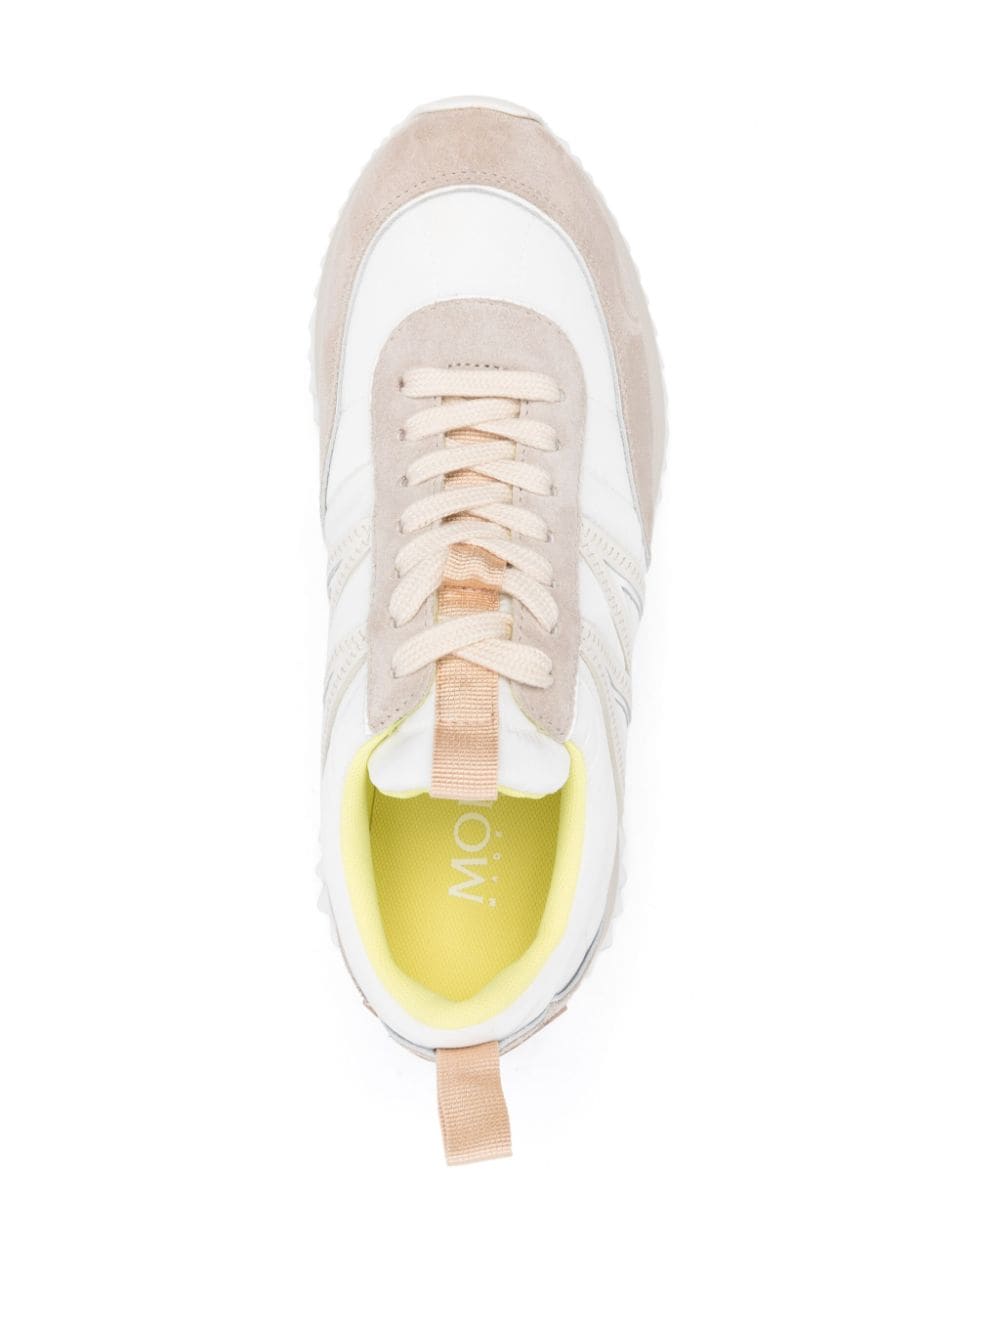 'Pacey' sneakers